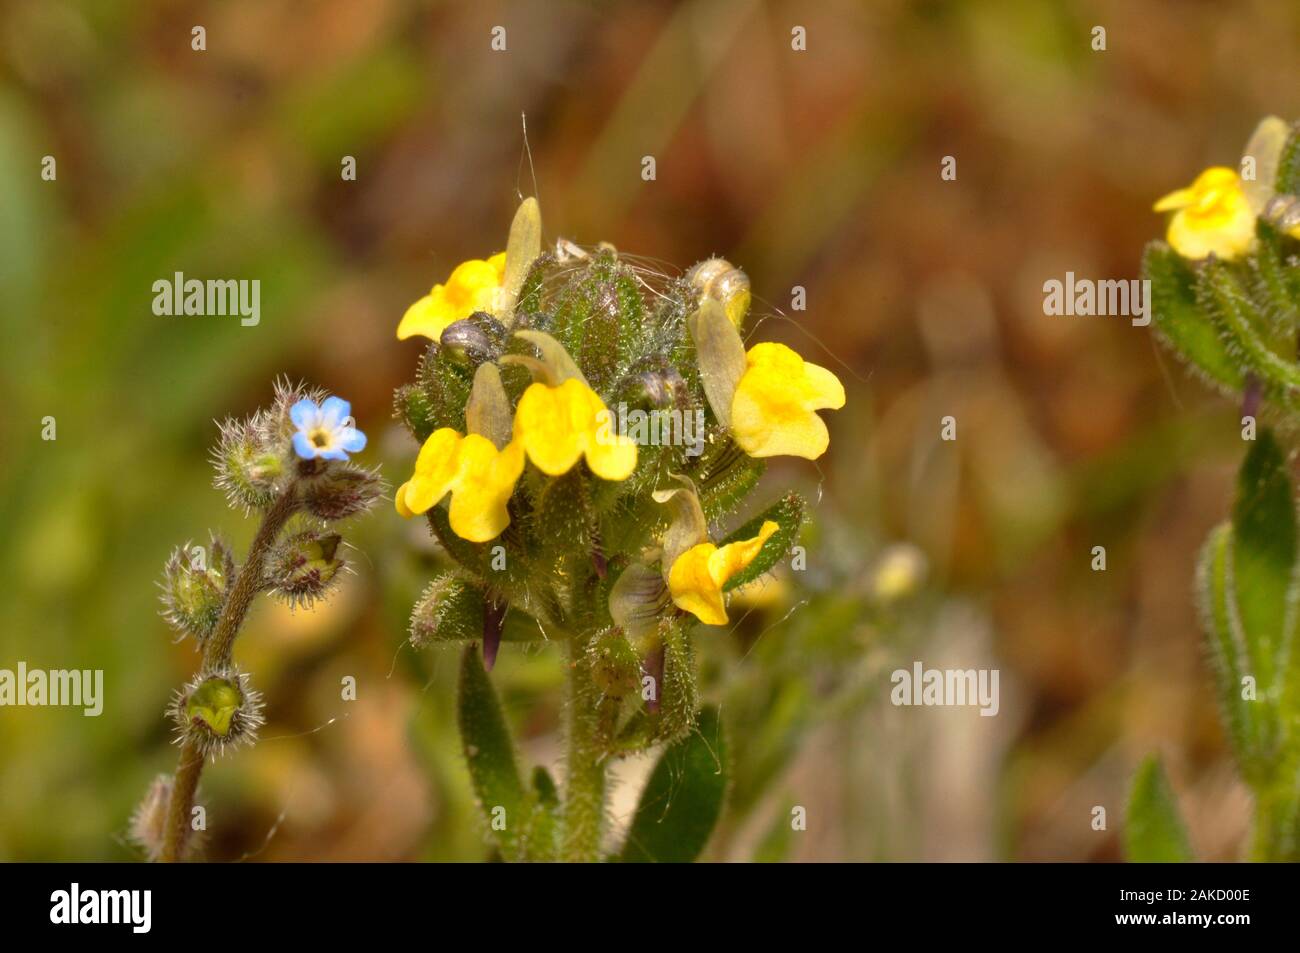 Sand Toadflax,'Linaria arenaria', Short, Sticky haired, Yellow flowered,Rare.Found in Sand dunes.with Myosotis laxa - Tufted Forget-me-not, Coastal ha Stock Photo